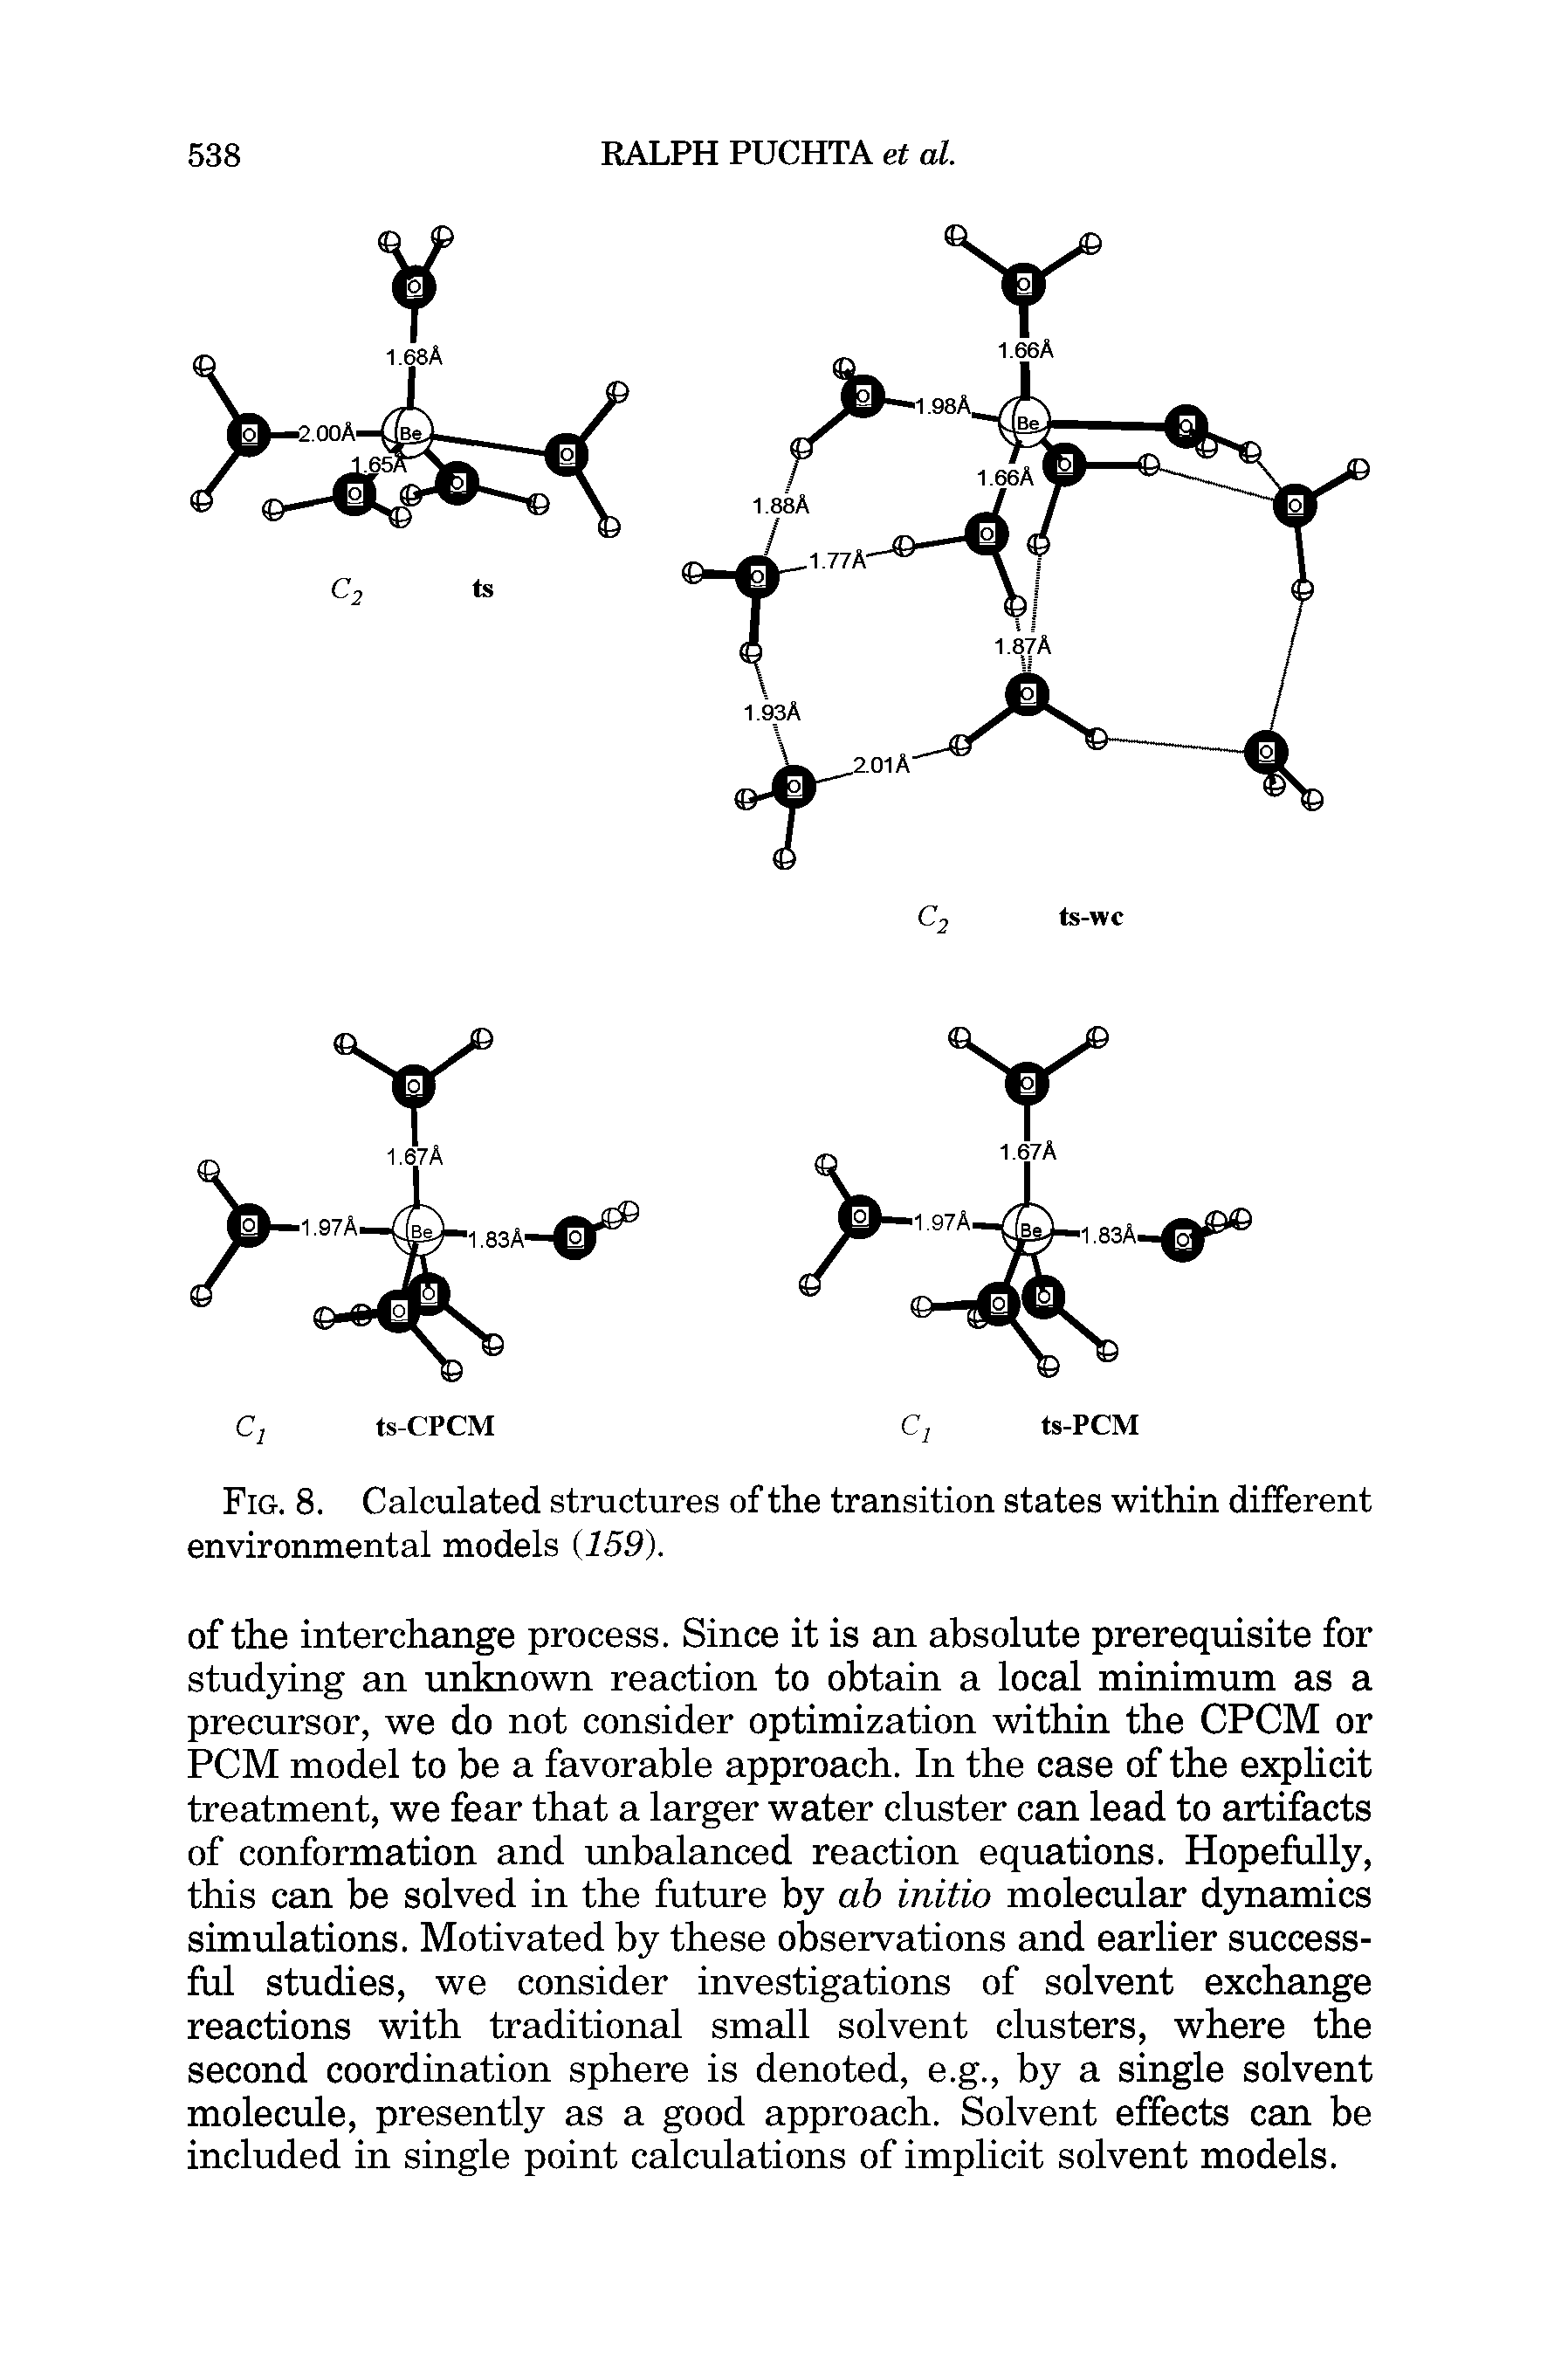 Fig. 8. Calculated structures of the transition states within different environmental models (159).